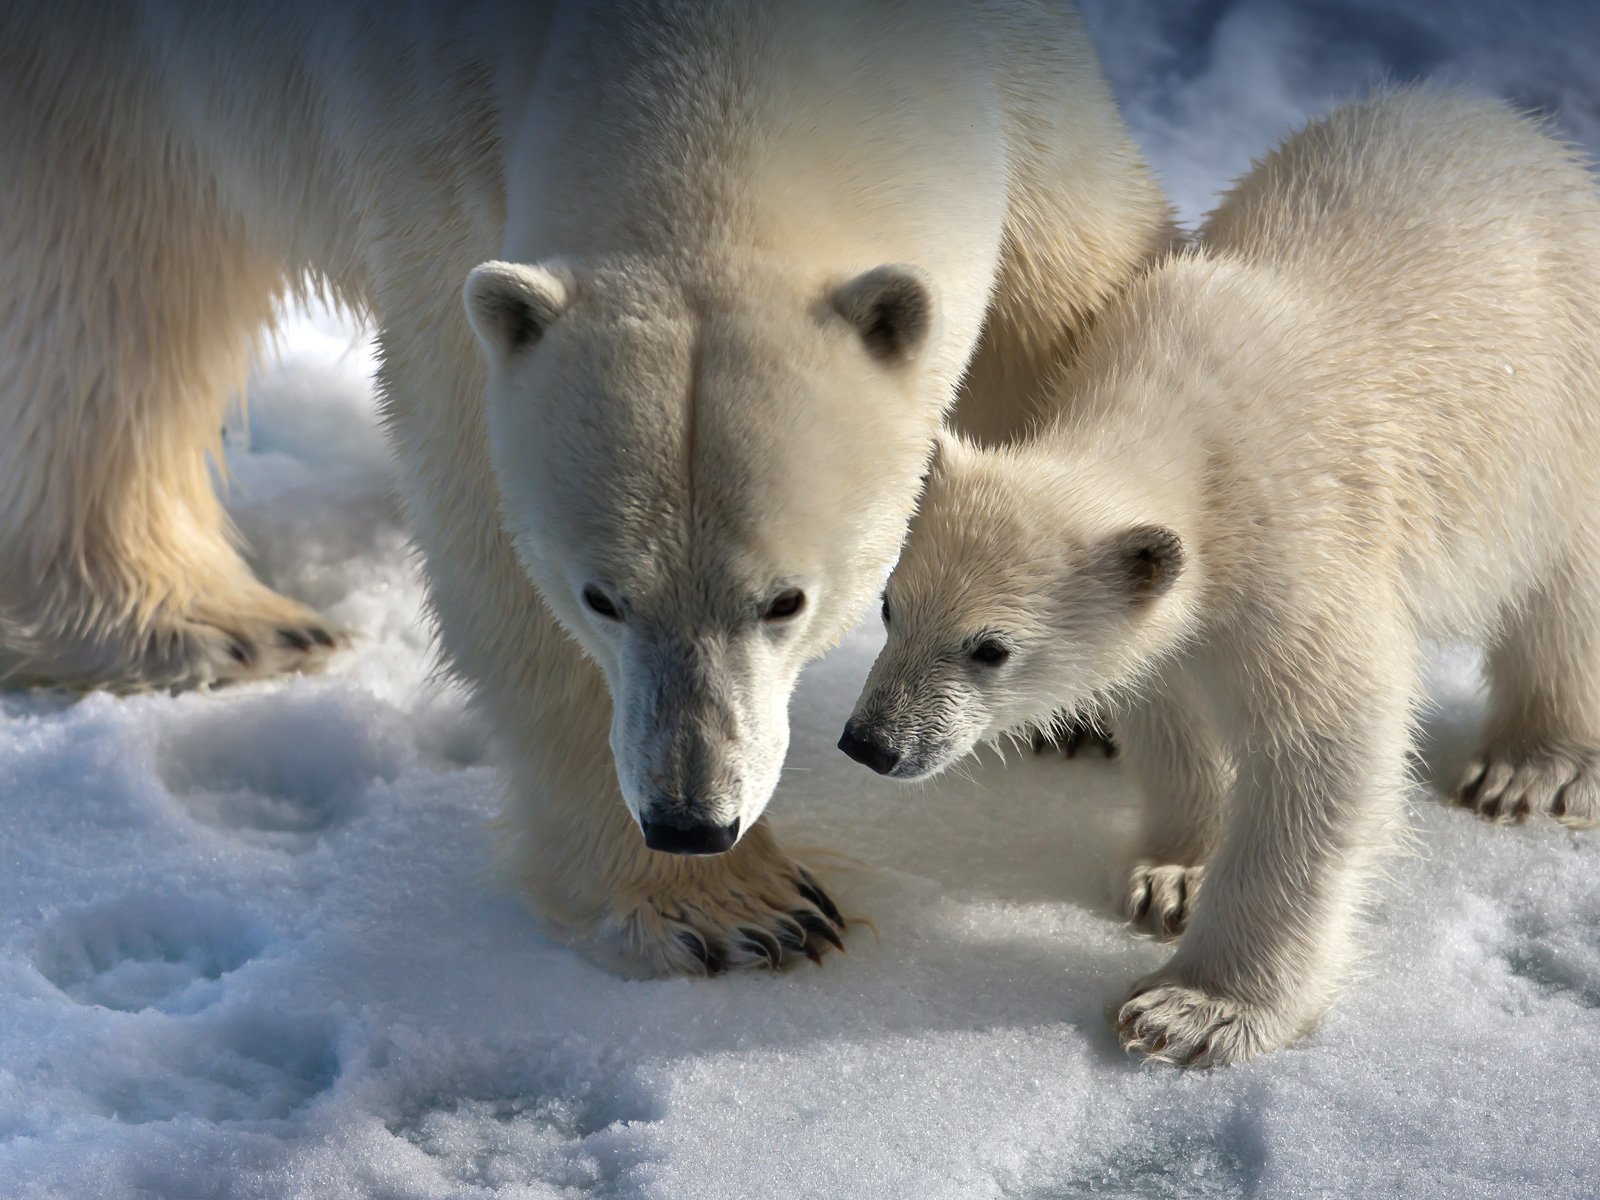 A polar bear and her cub spotted in the Arctic summer in Spitsbergen by Quark Expeditions passengers.